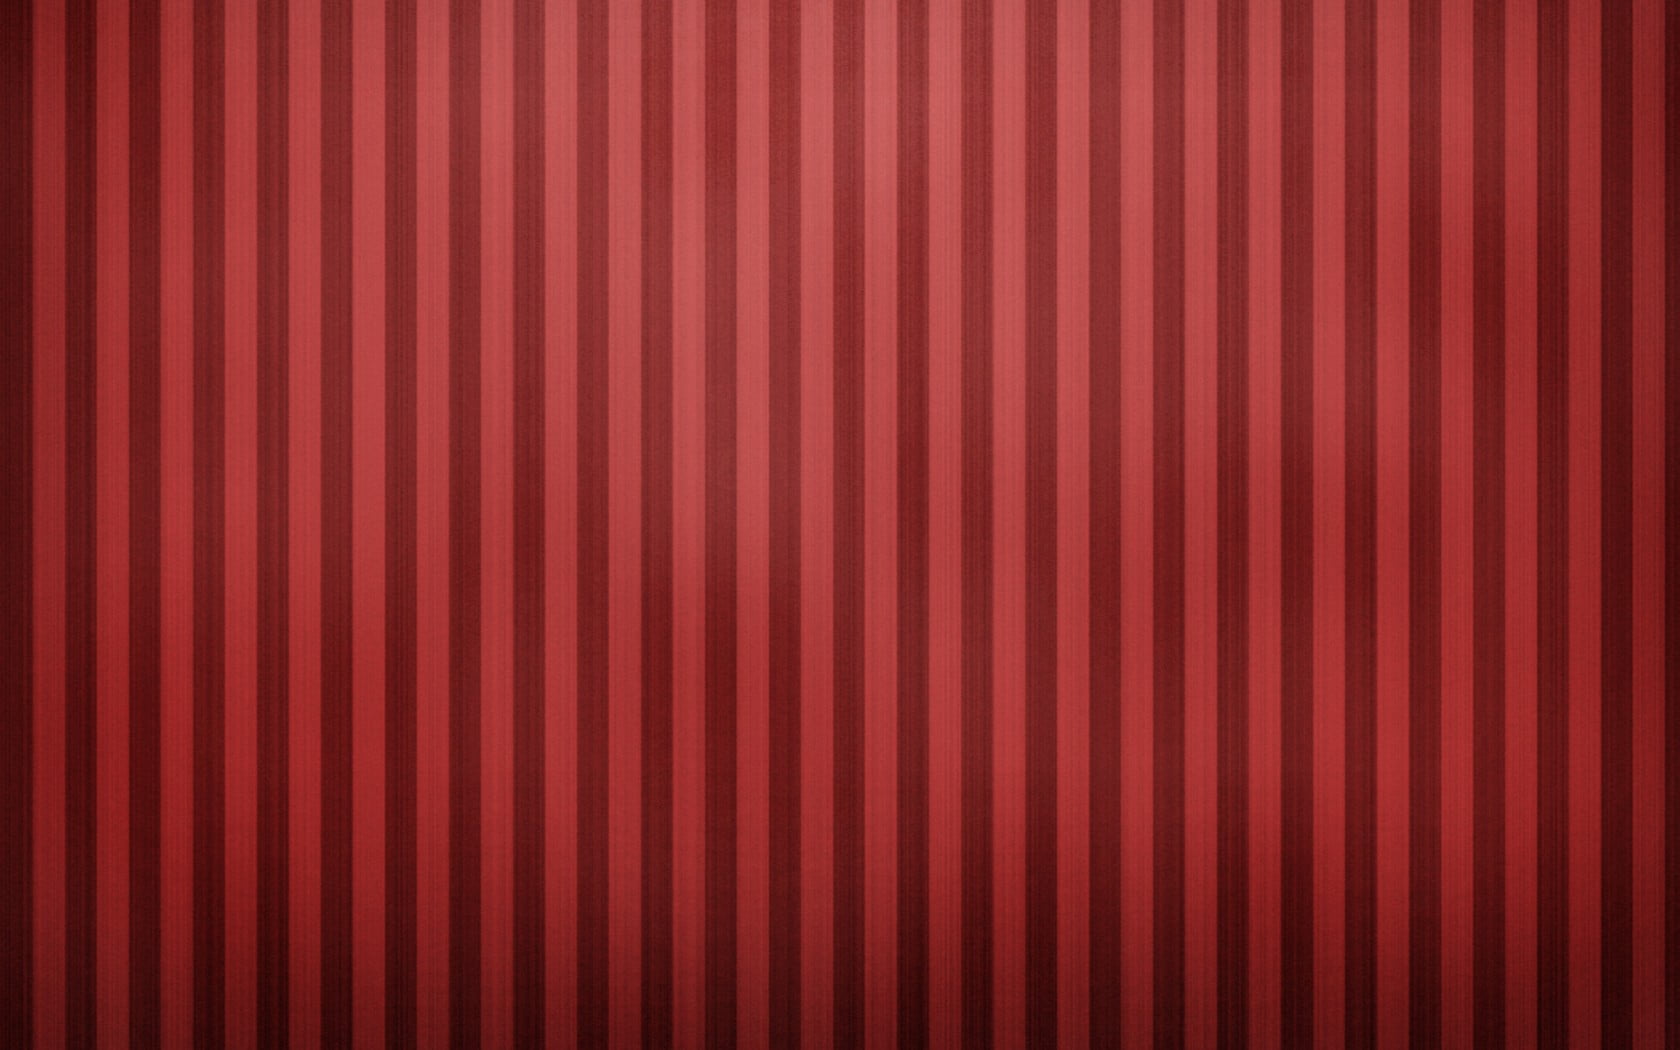 2-toned red striped cloth, abstract, stripes